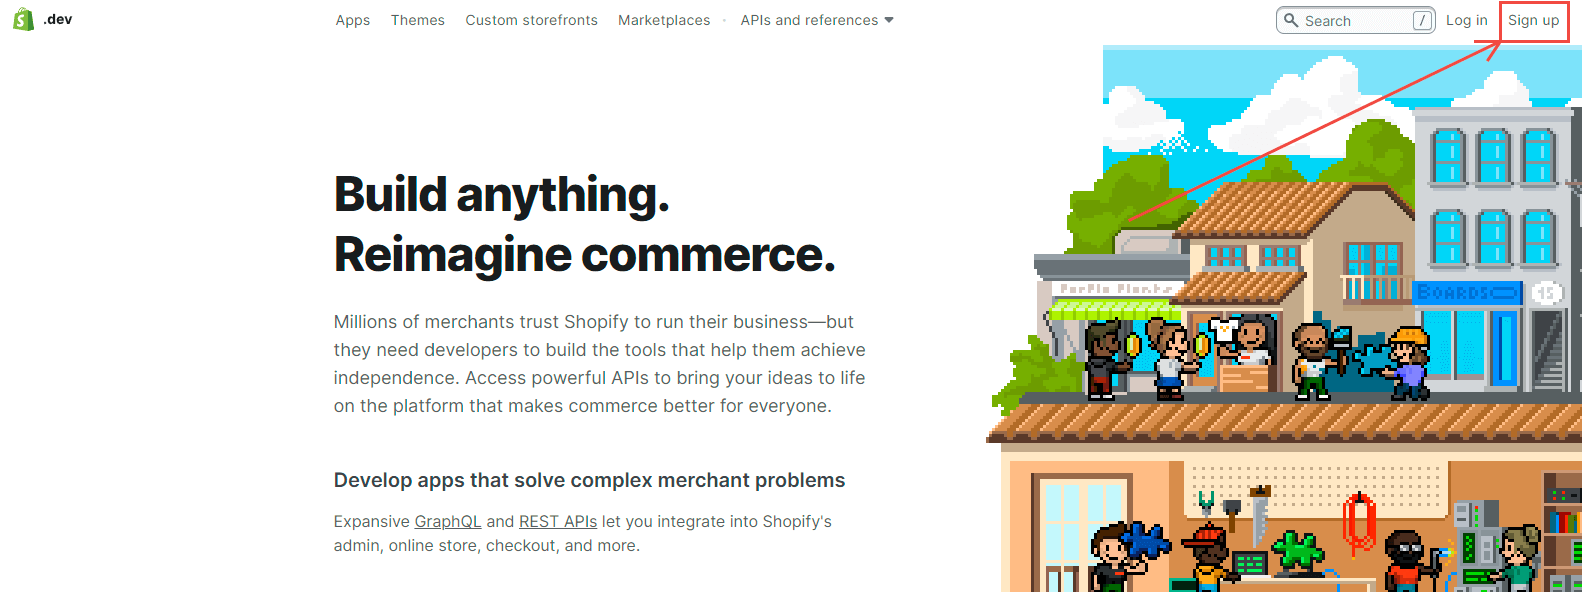 Shopify index